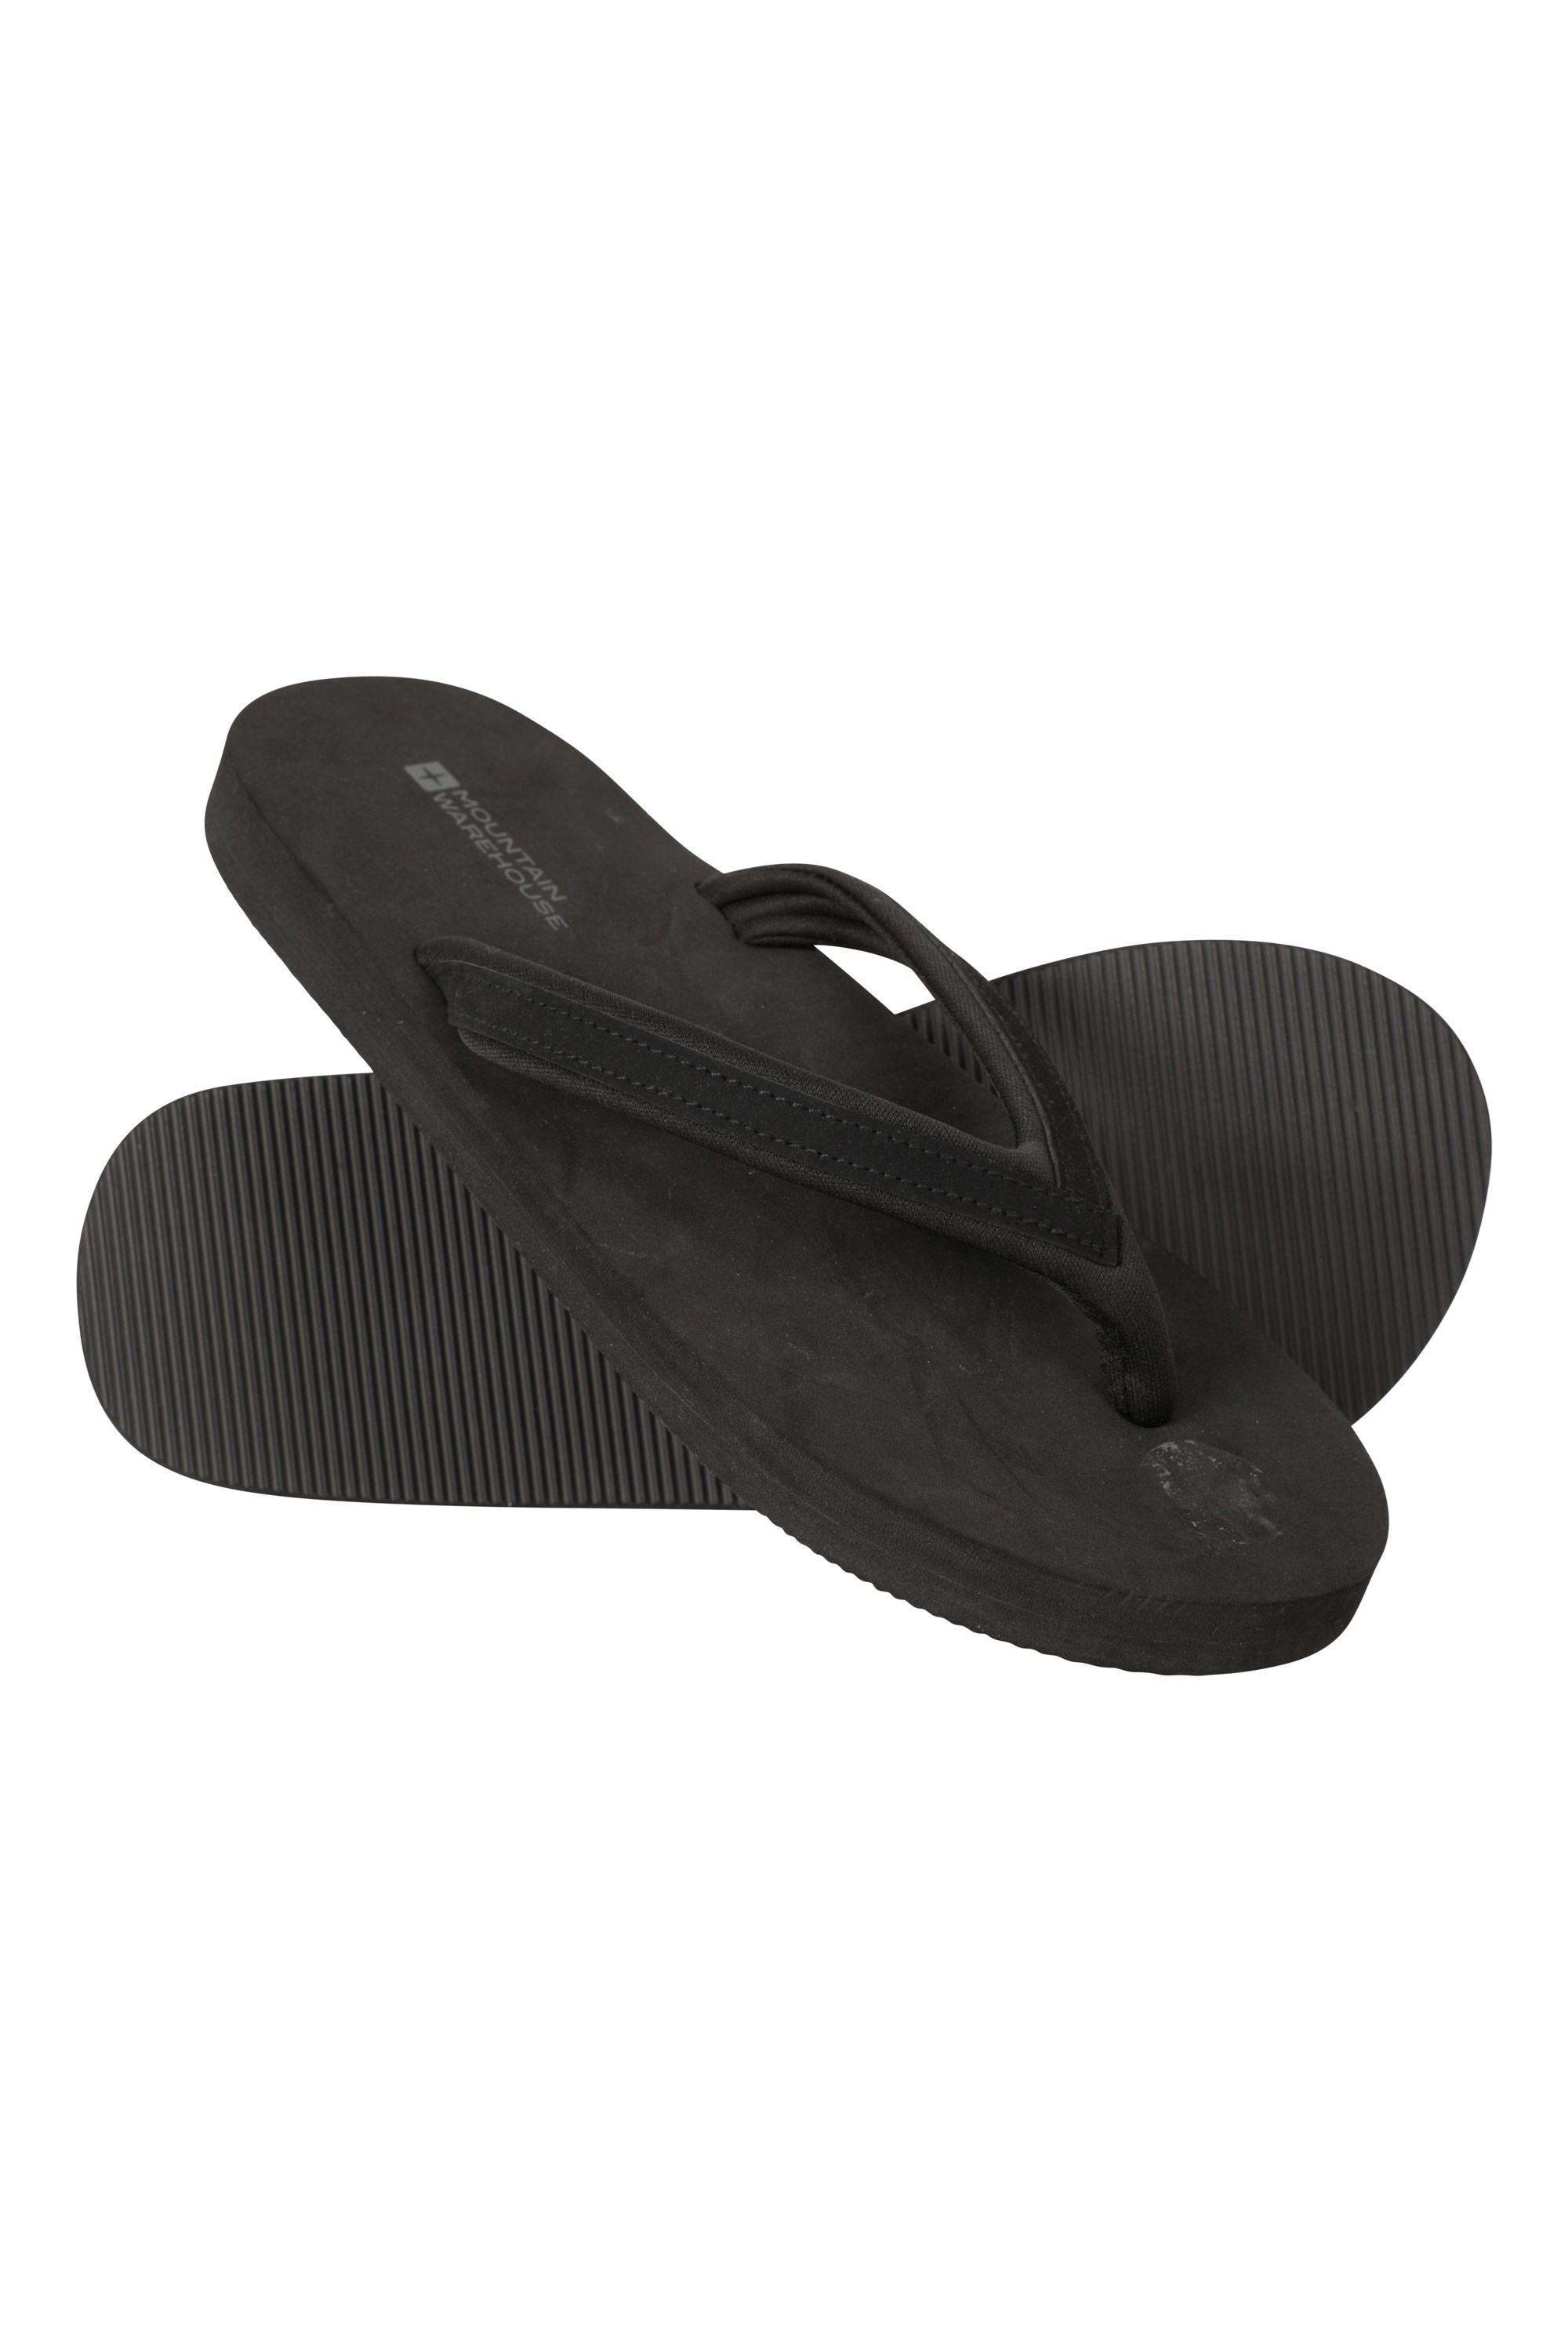 Vacation Womens Recycled Flip Flops - Black